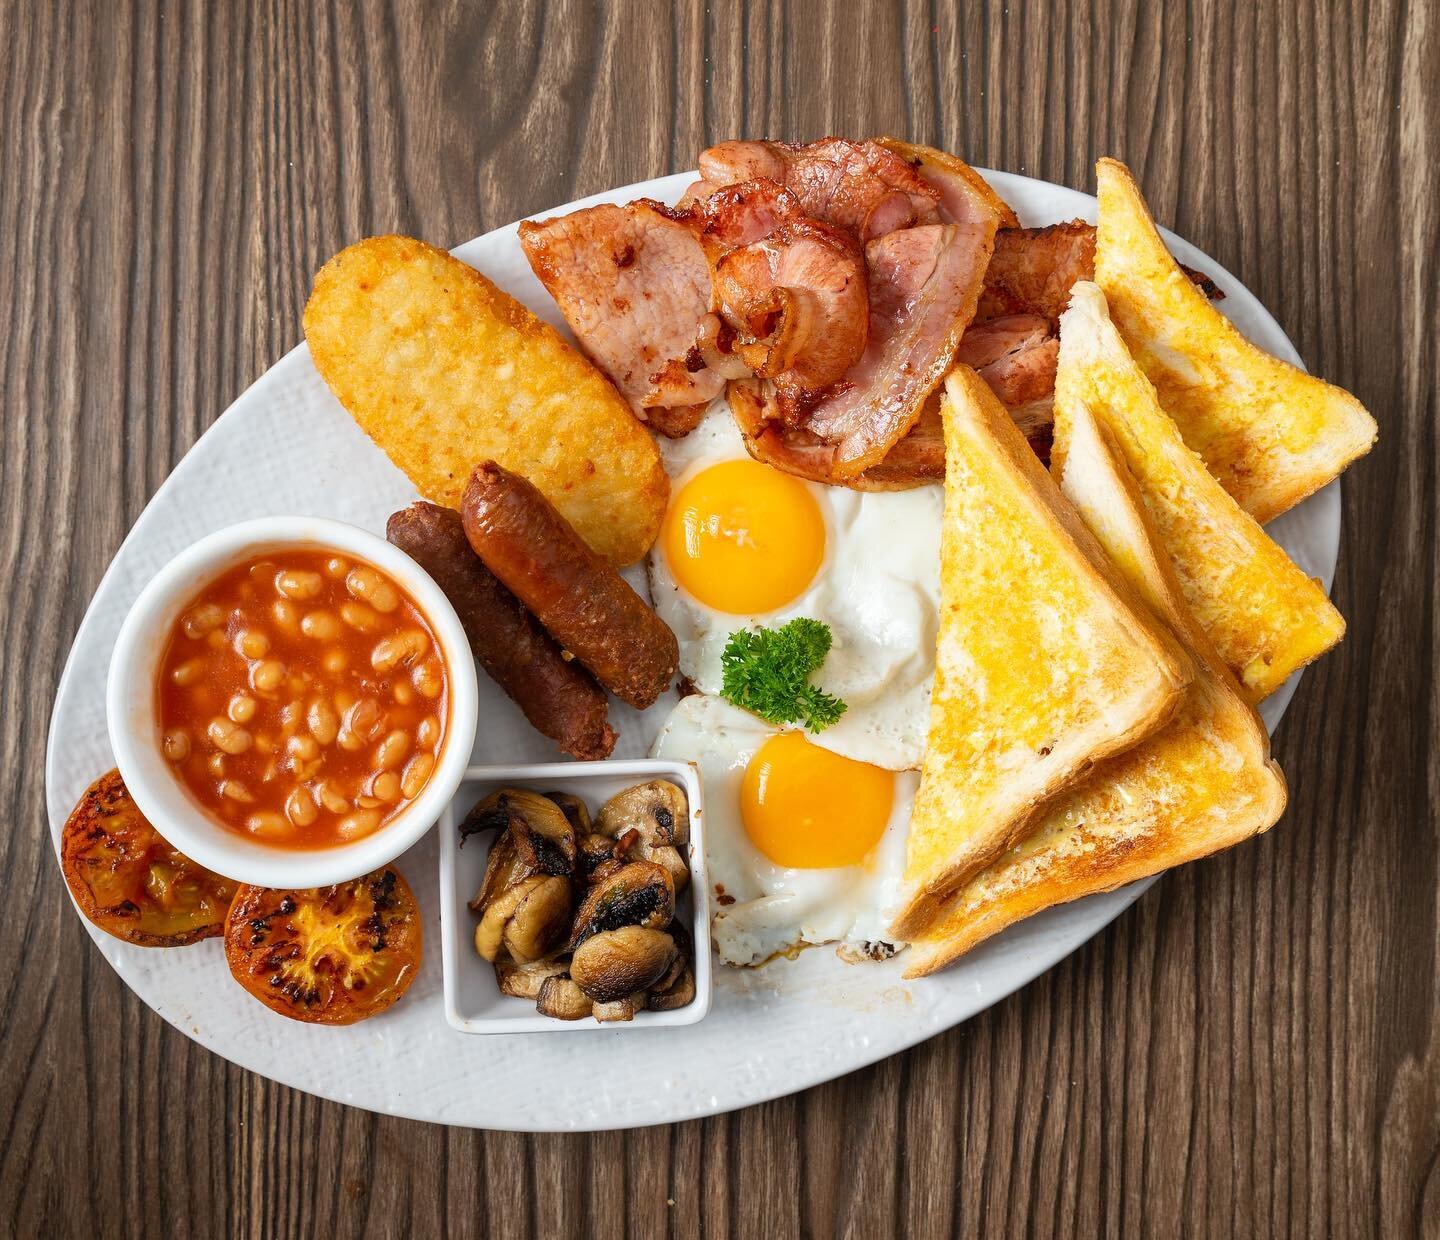 Don&rsquo;t have plans Saturday morning? Let us help you out with that&hellip;

Come on down and check out the brand new menu at The Coffee Shopp&egrave;! 😍

We have a number of menu items available to choose from, such as our delicious Big Brekky ?